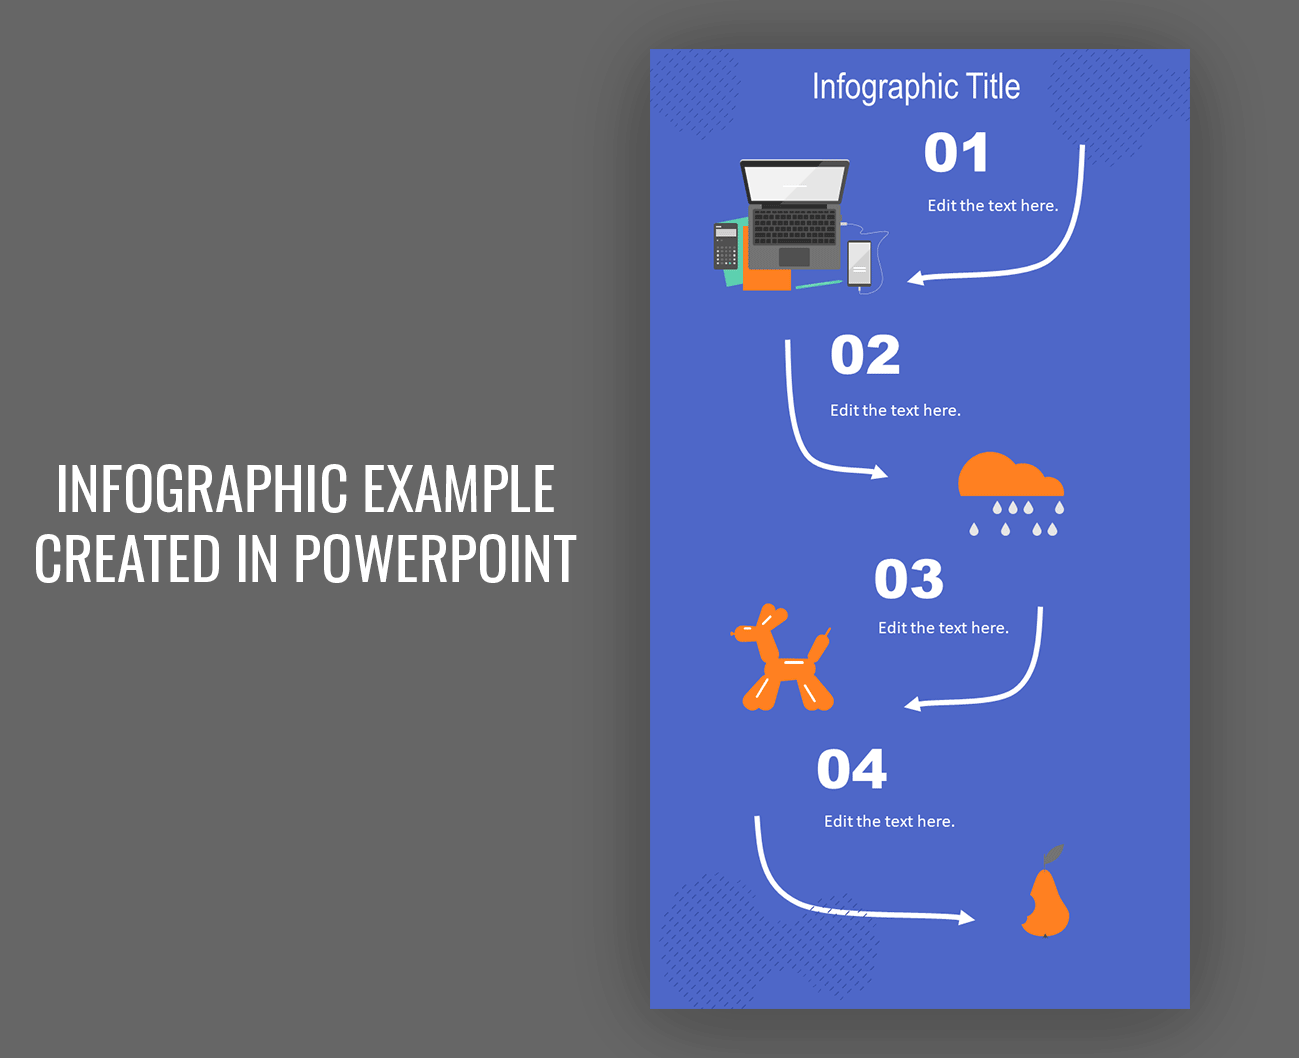 Example of a simple infographic design created in PowerPoint